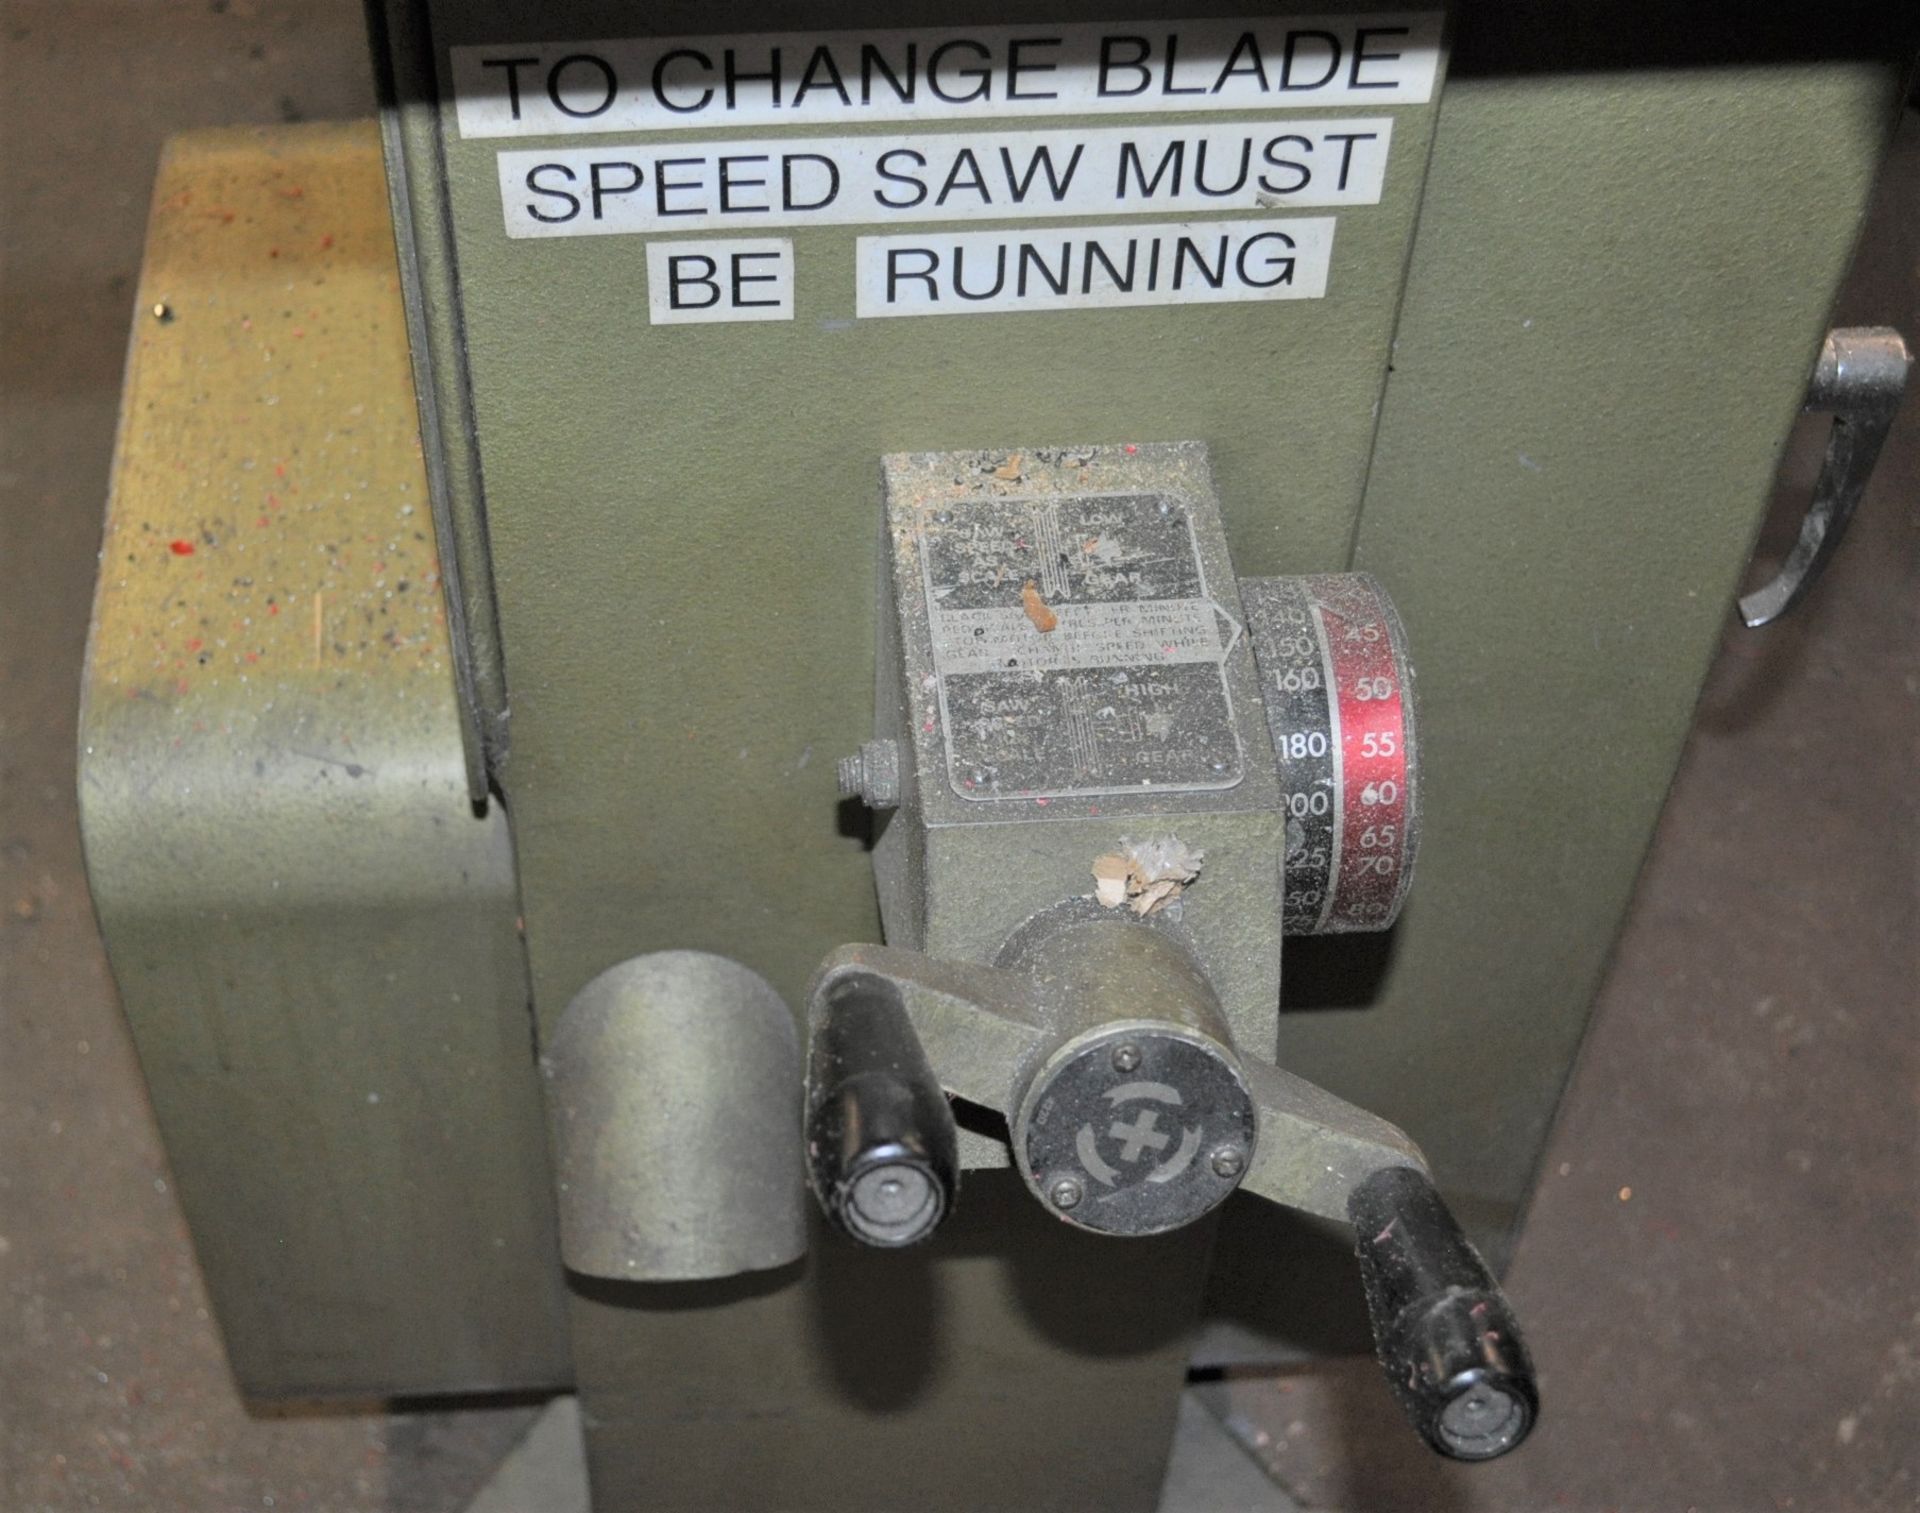 STARTRITE MDL. 30RWS VERTICAL BAND SAW WITH 20-1/2" X 20-1/2" TILT TABLE, BLADE WELDING - Image 3 of 5